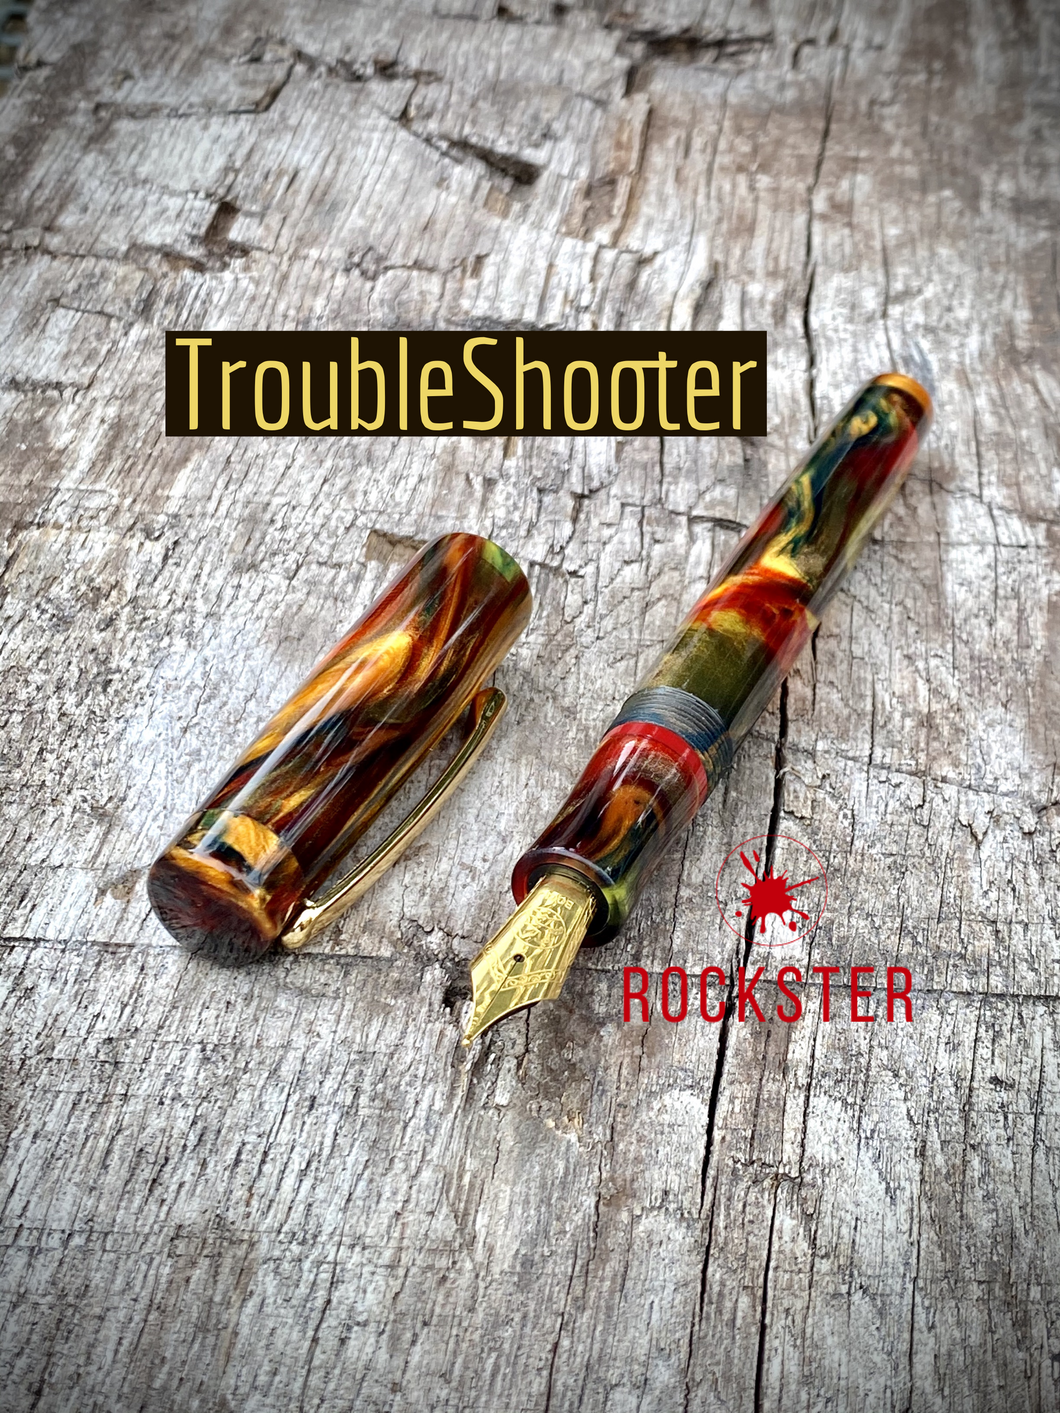 TroubleShooter 1313 in Rockster Keene Valley Resin